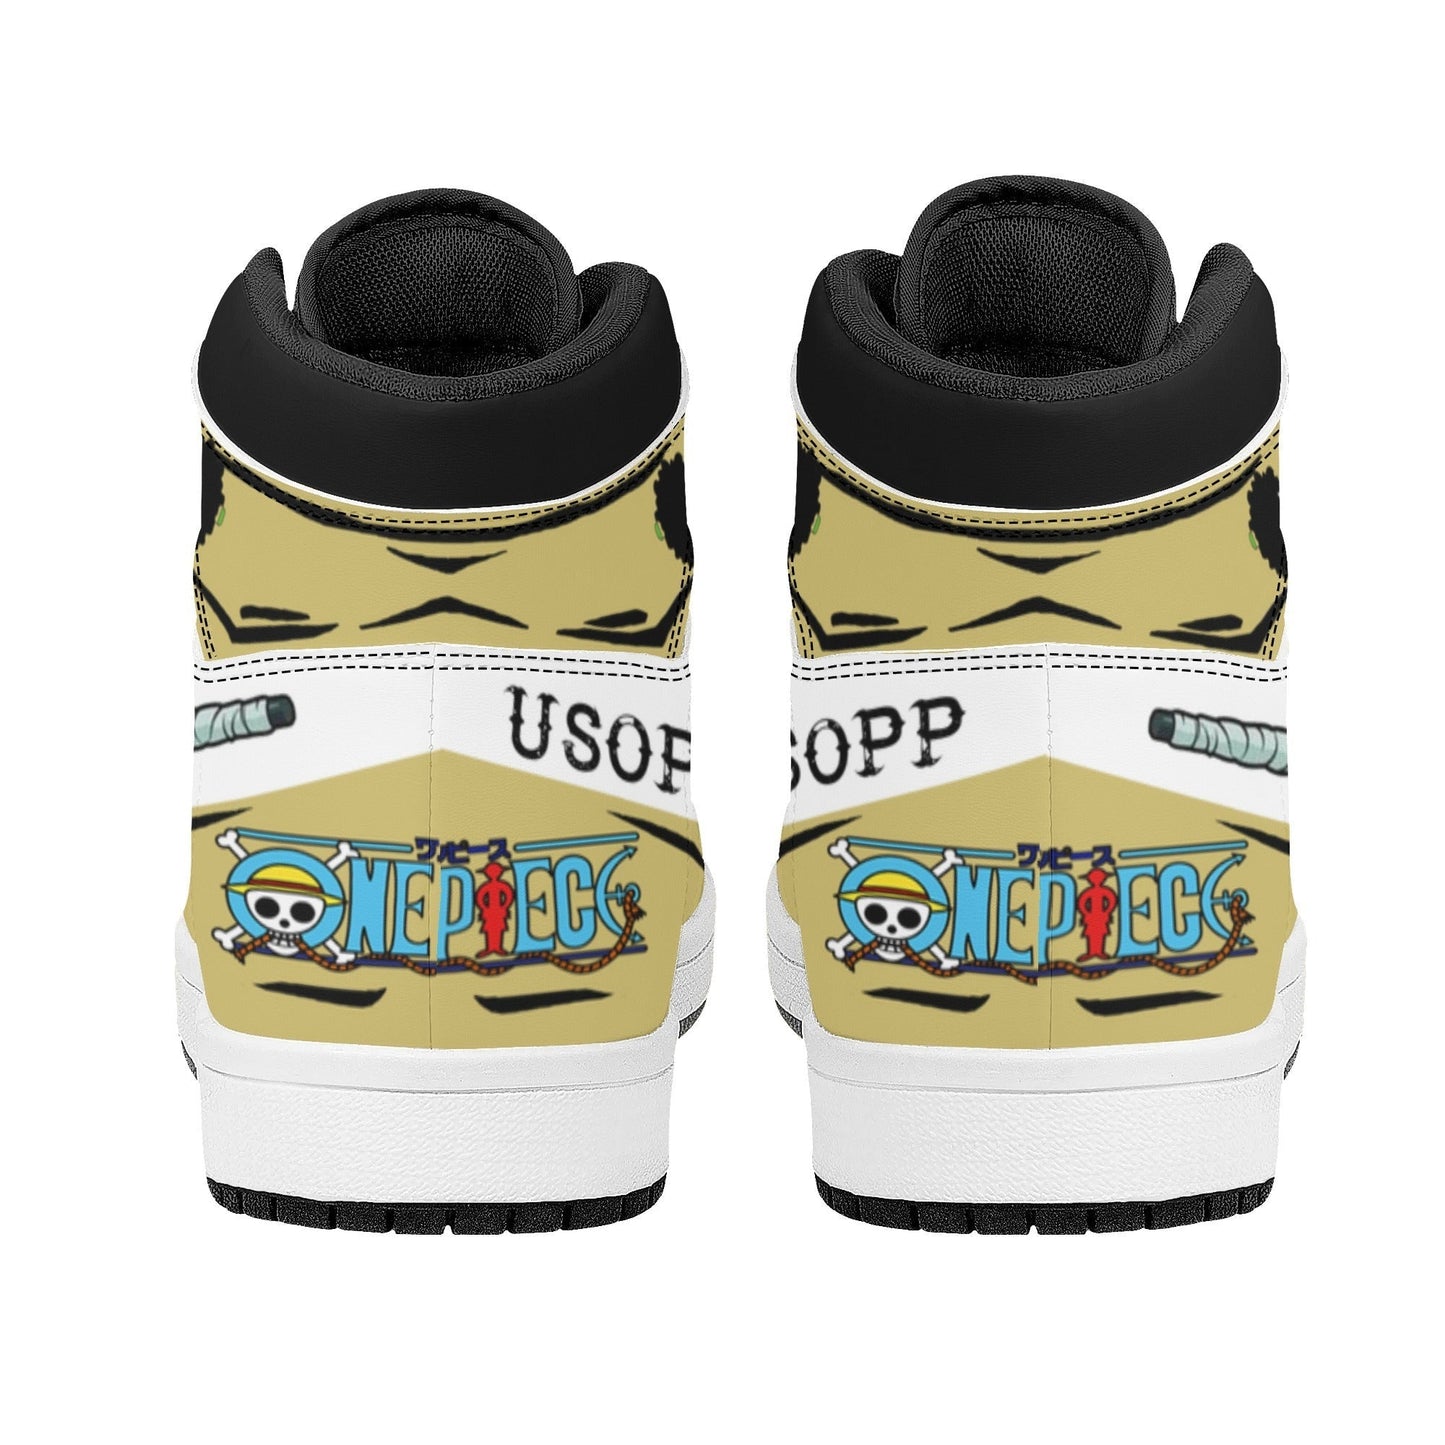 Usopp comfortable casual sports shoes（Size is American size, other countries please contact customer service）